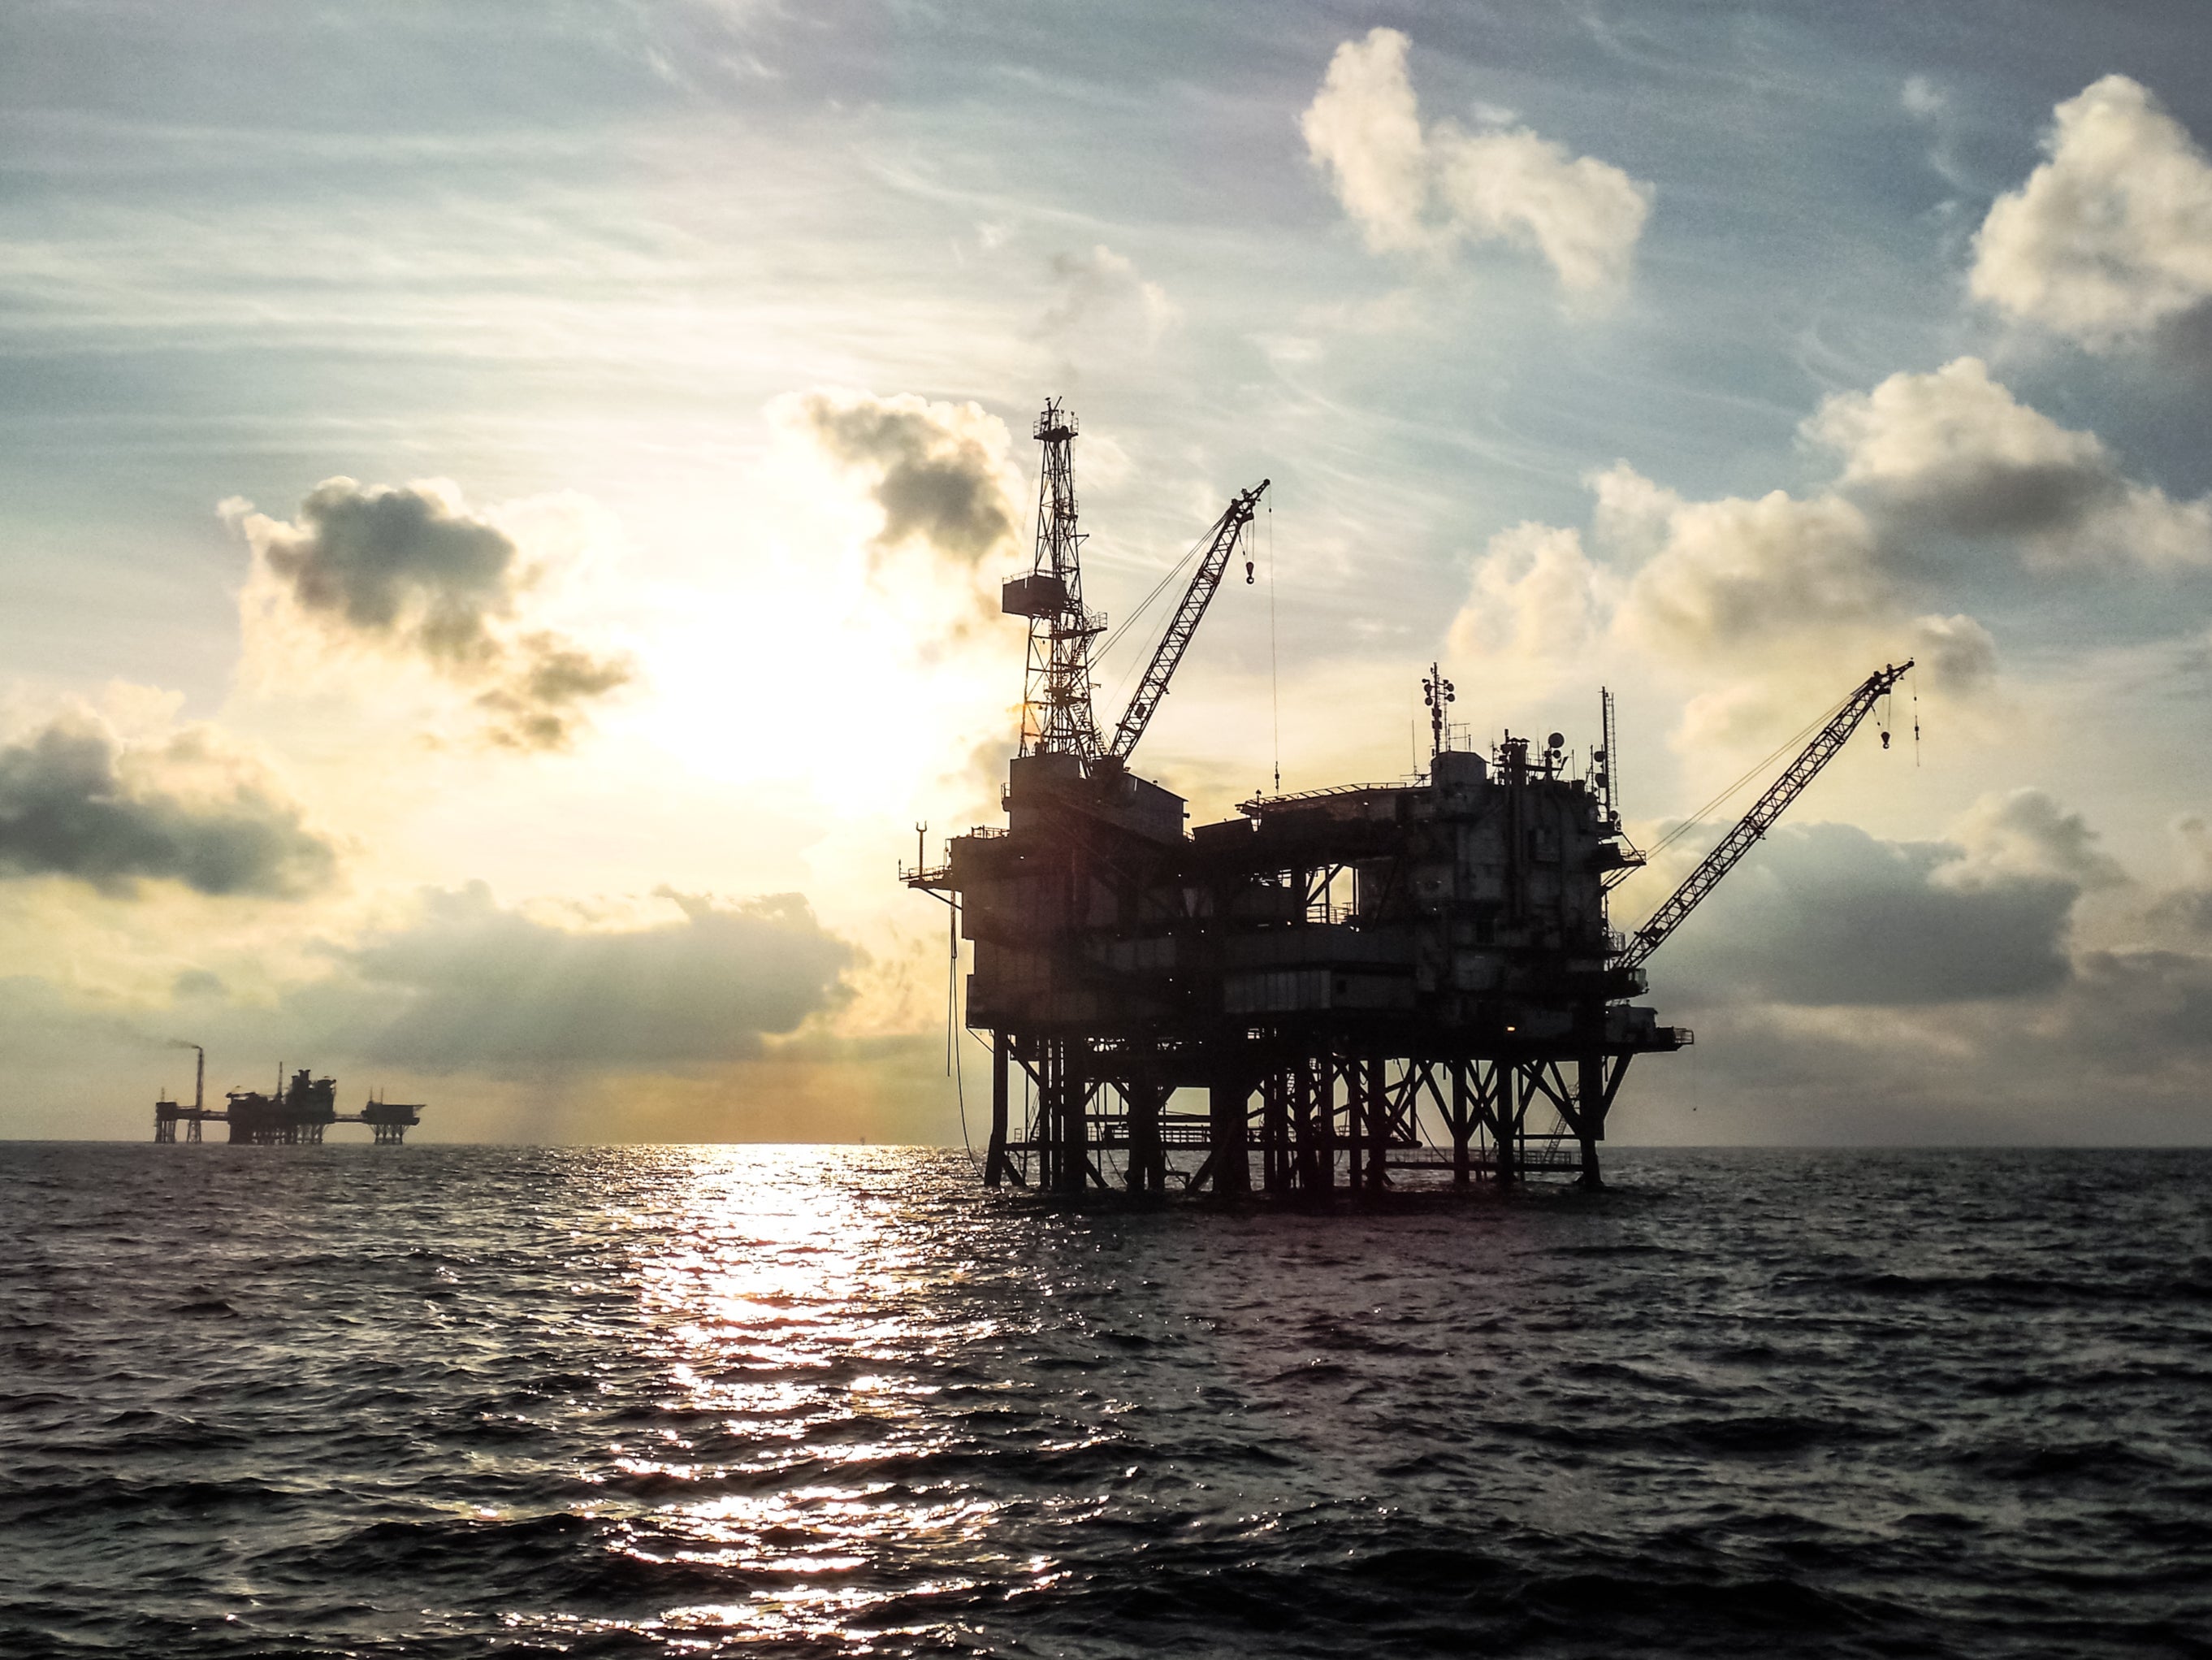 A number of new oil and gas fields are expected to be approved in the North Sea